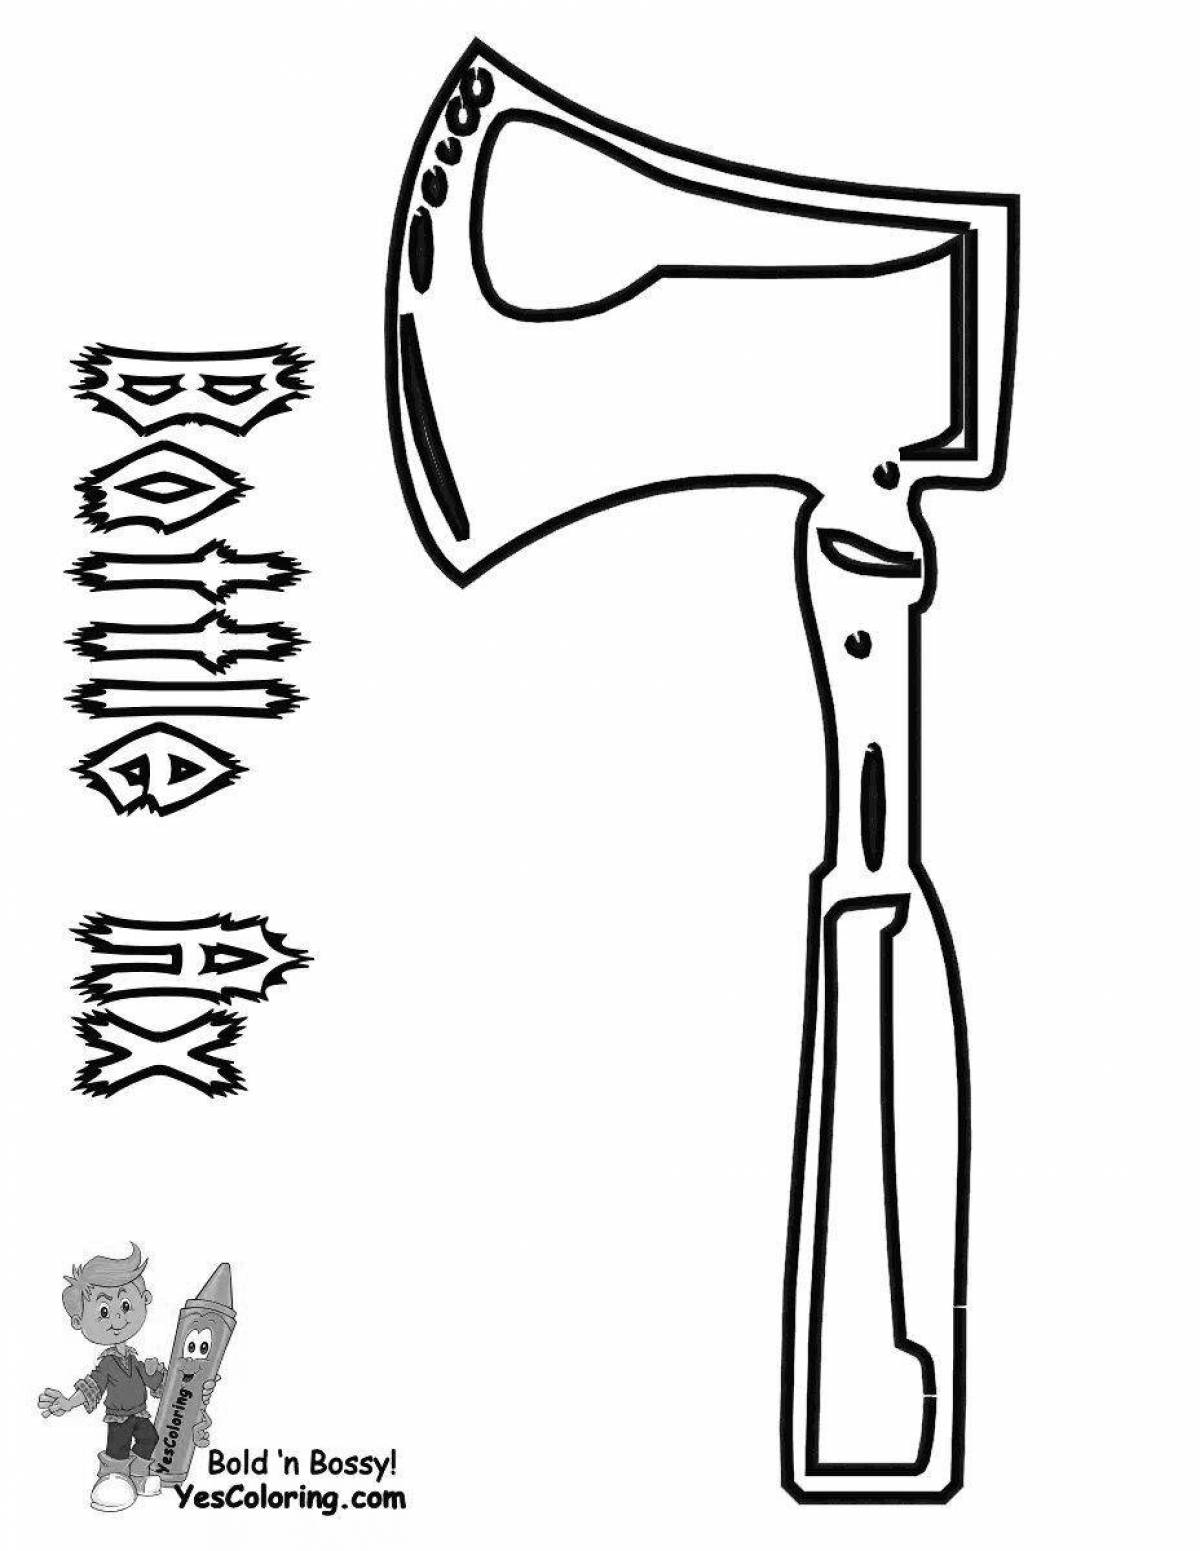 Wonderful ax coloring page for toddlers